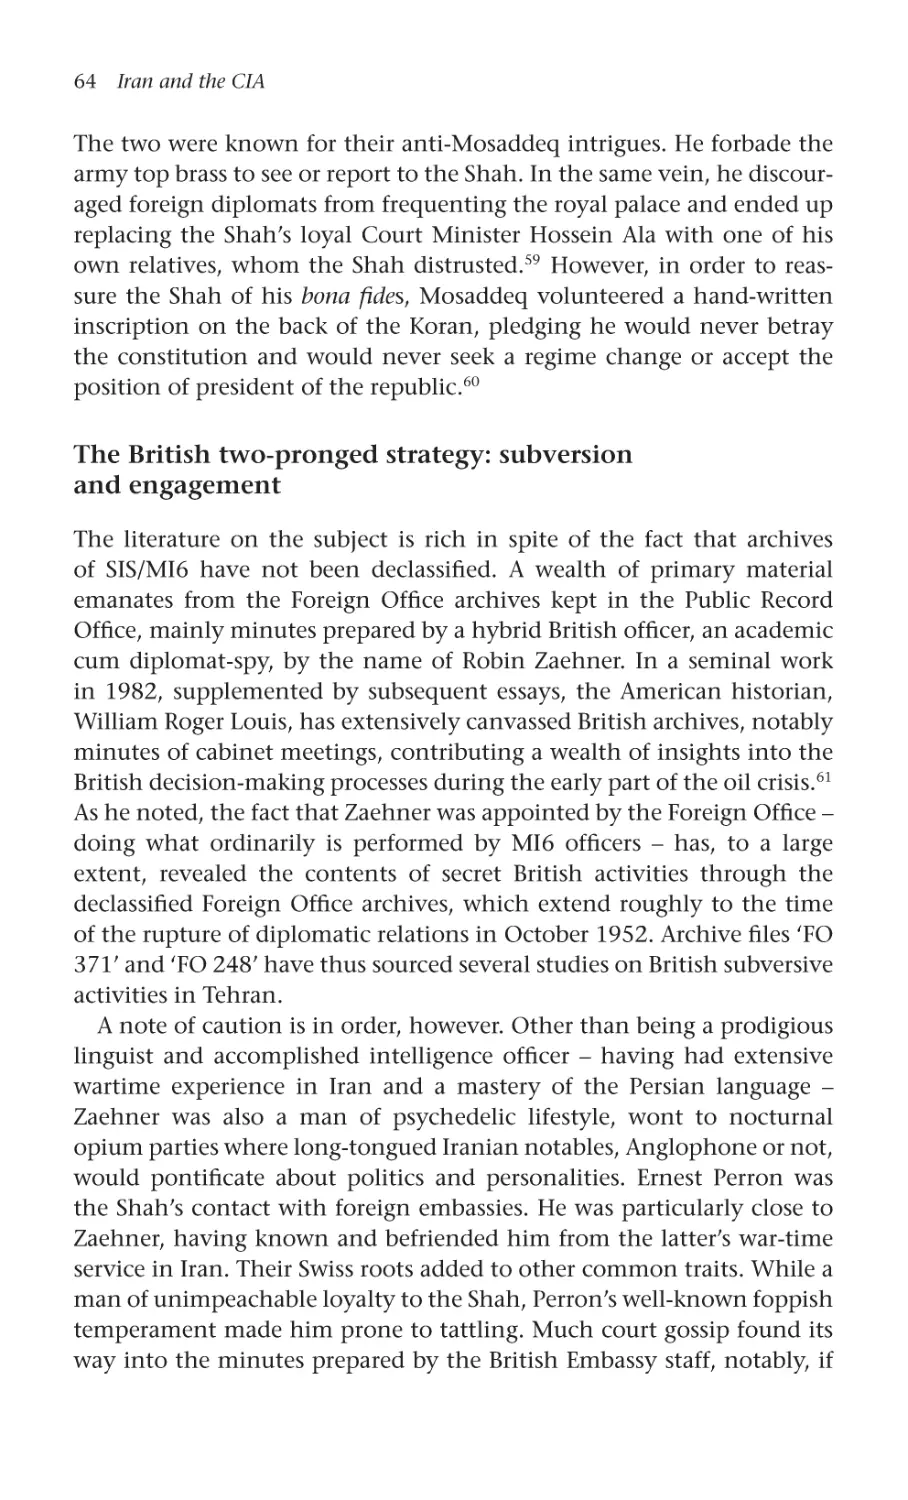 The British two-pronged strategy